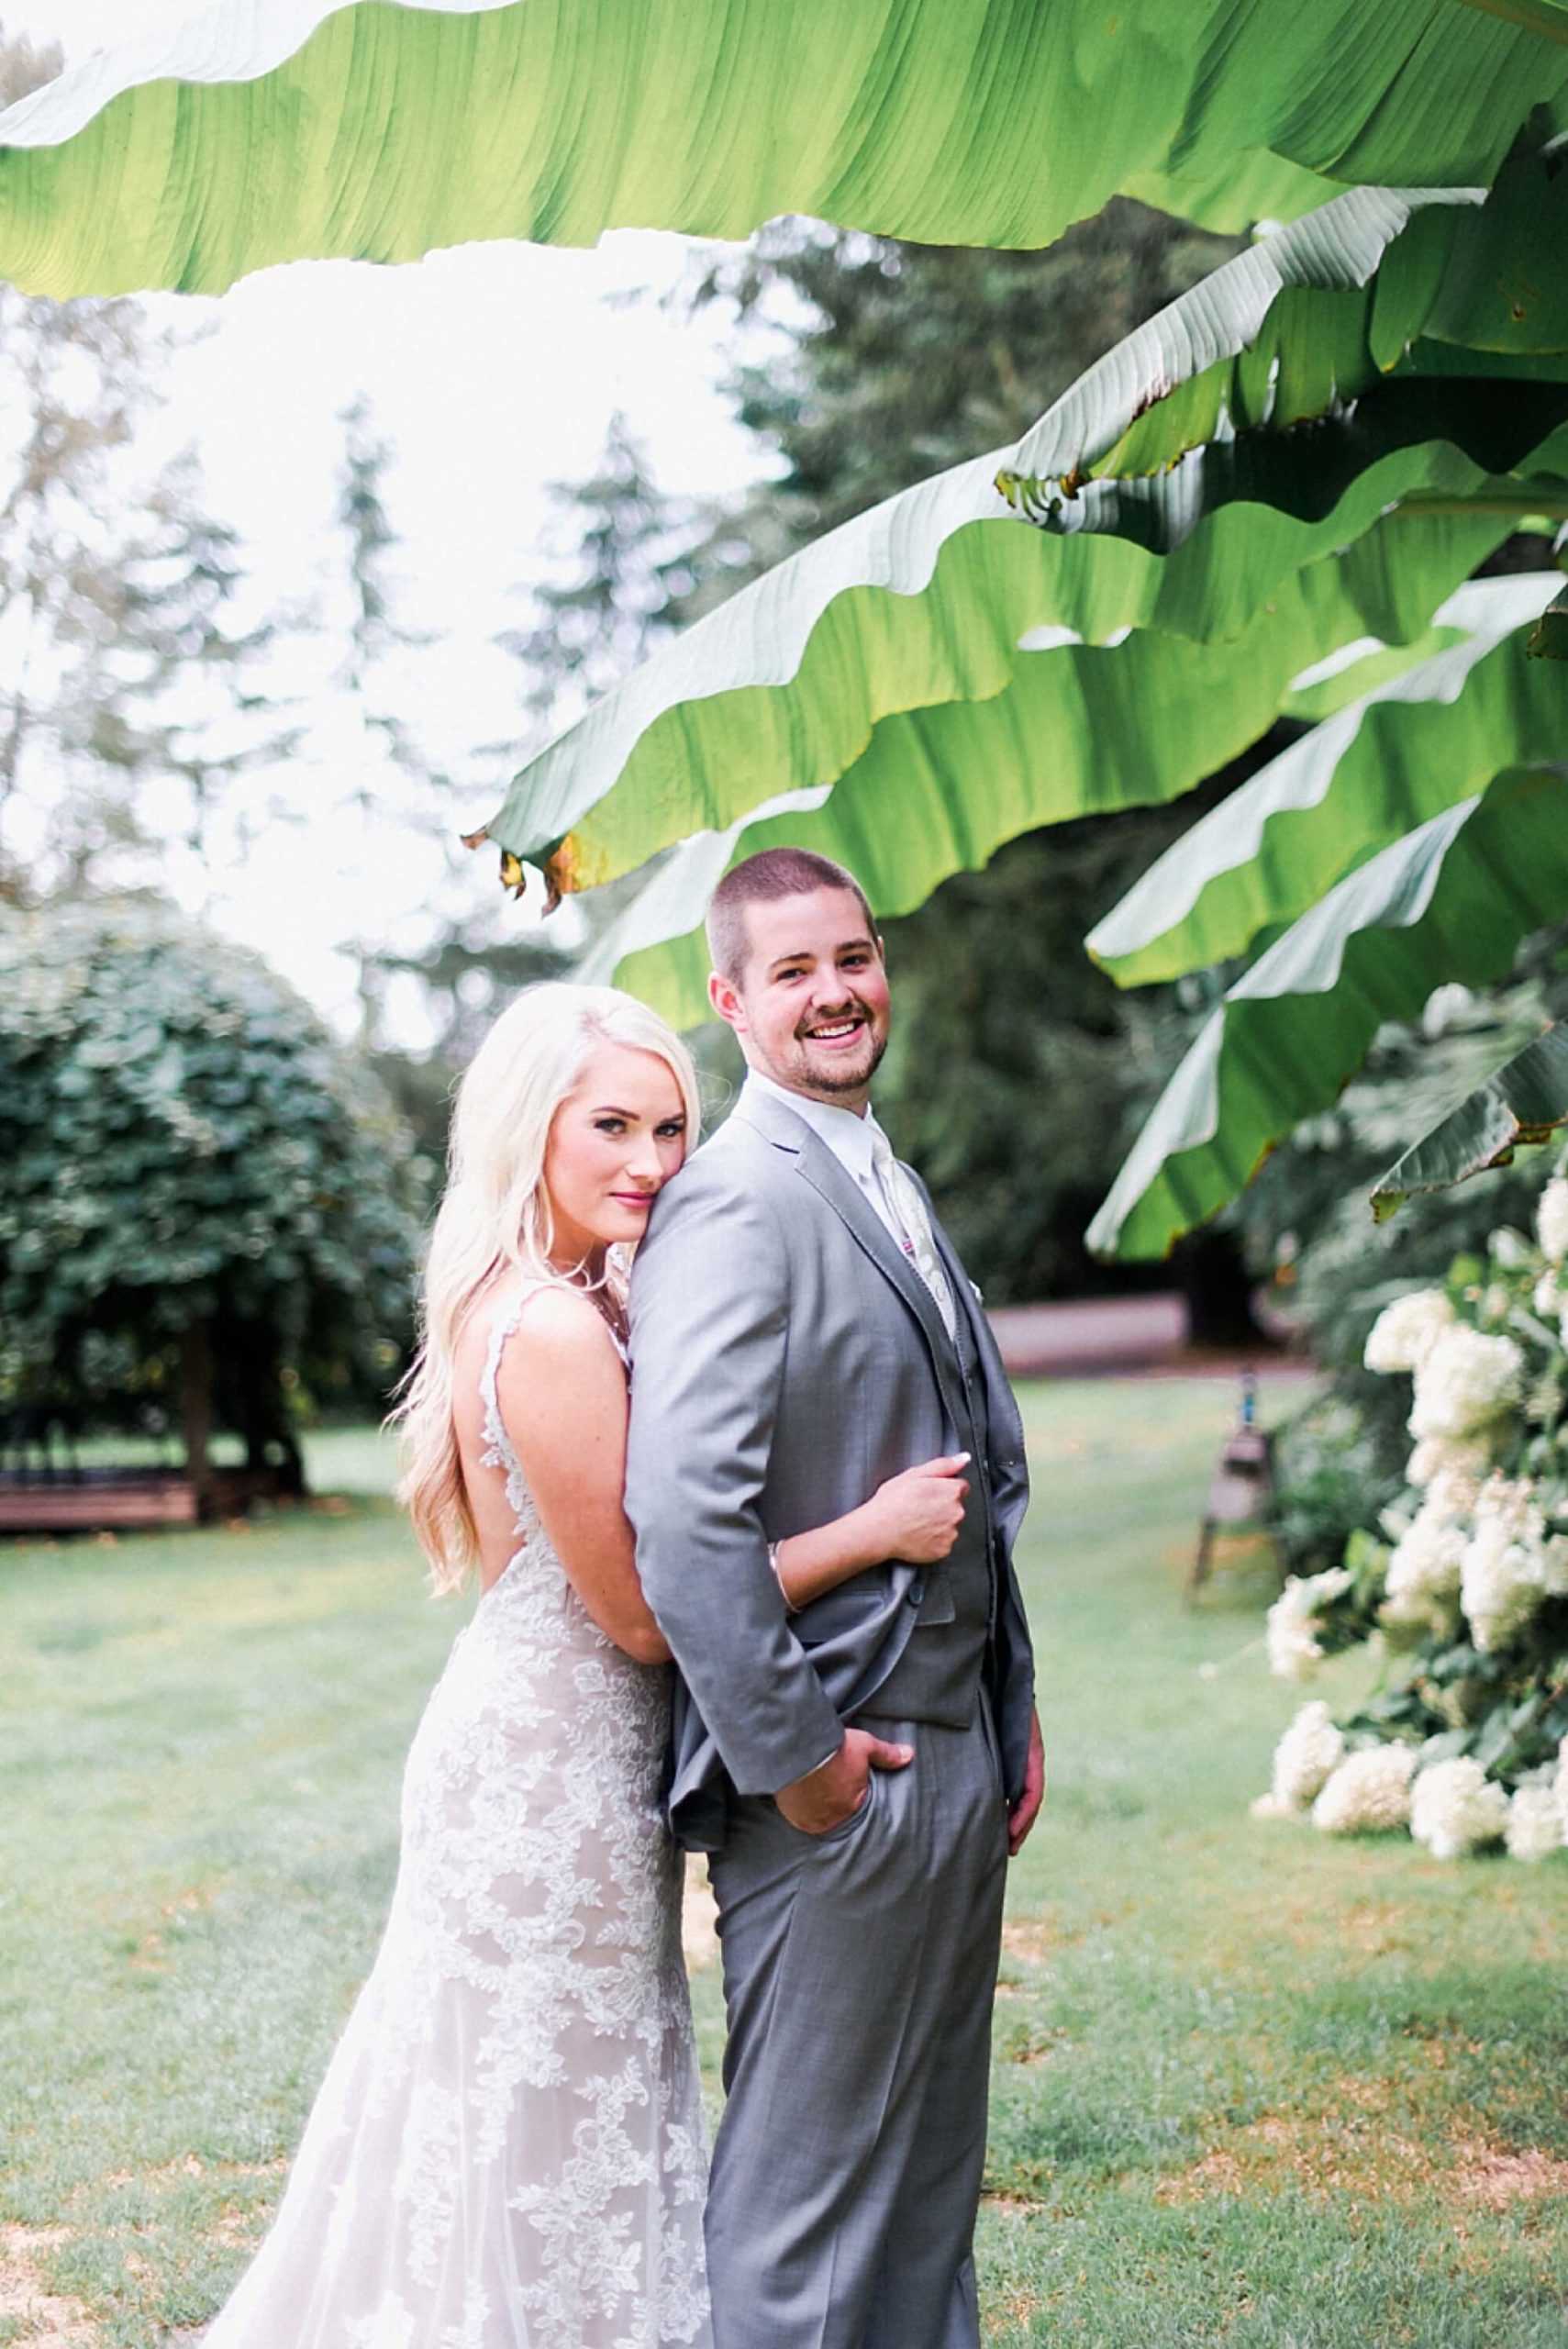 Northwest wedding with tropical details